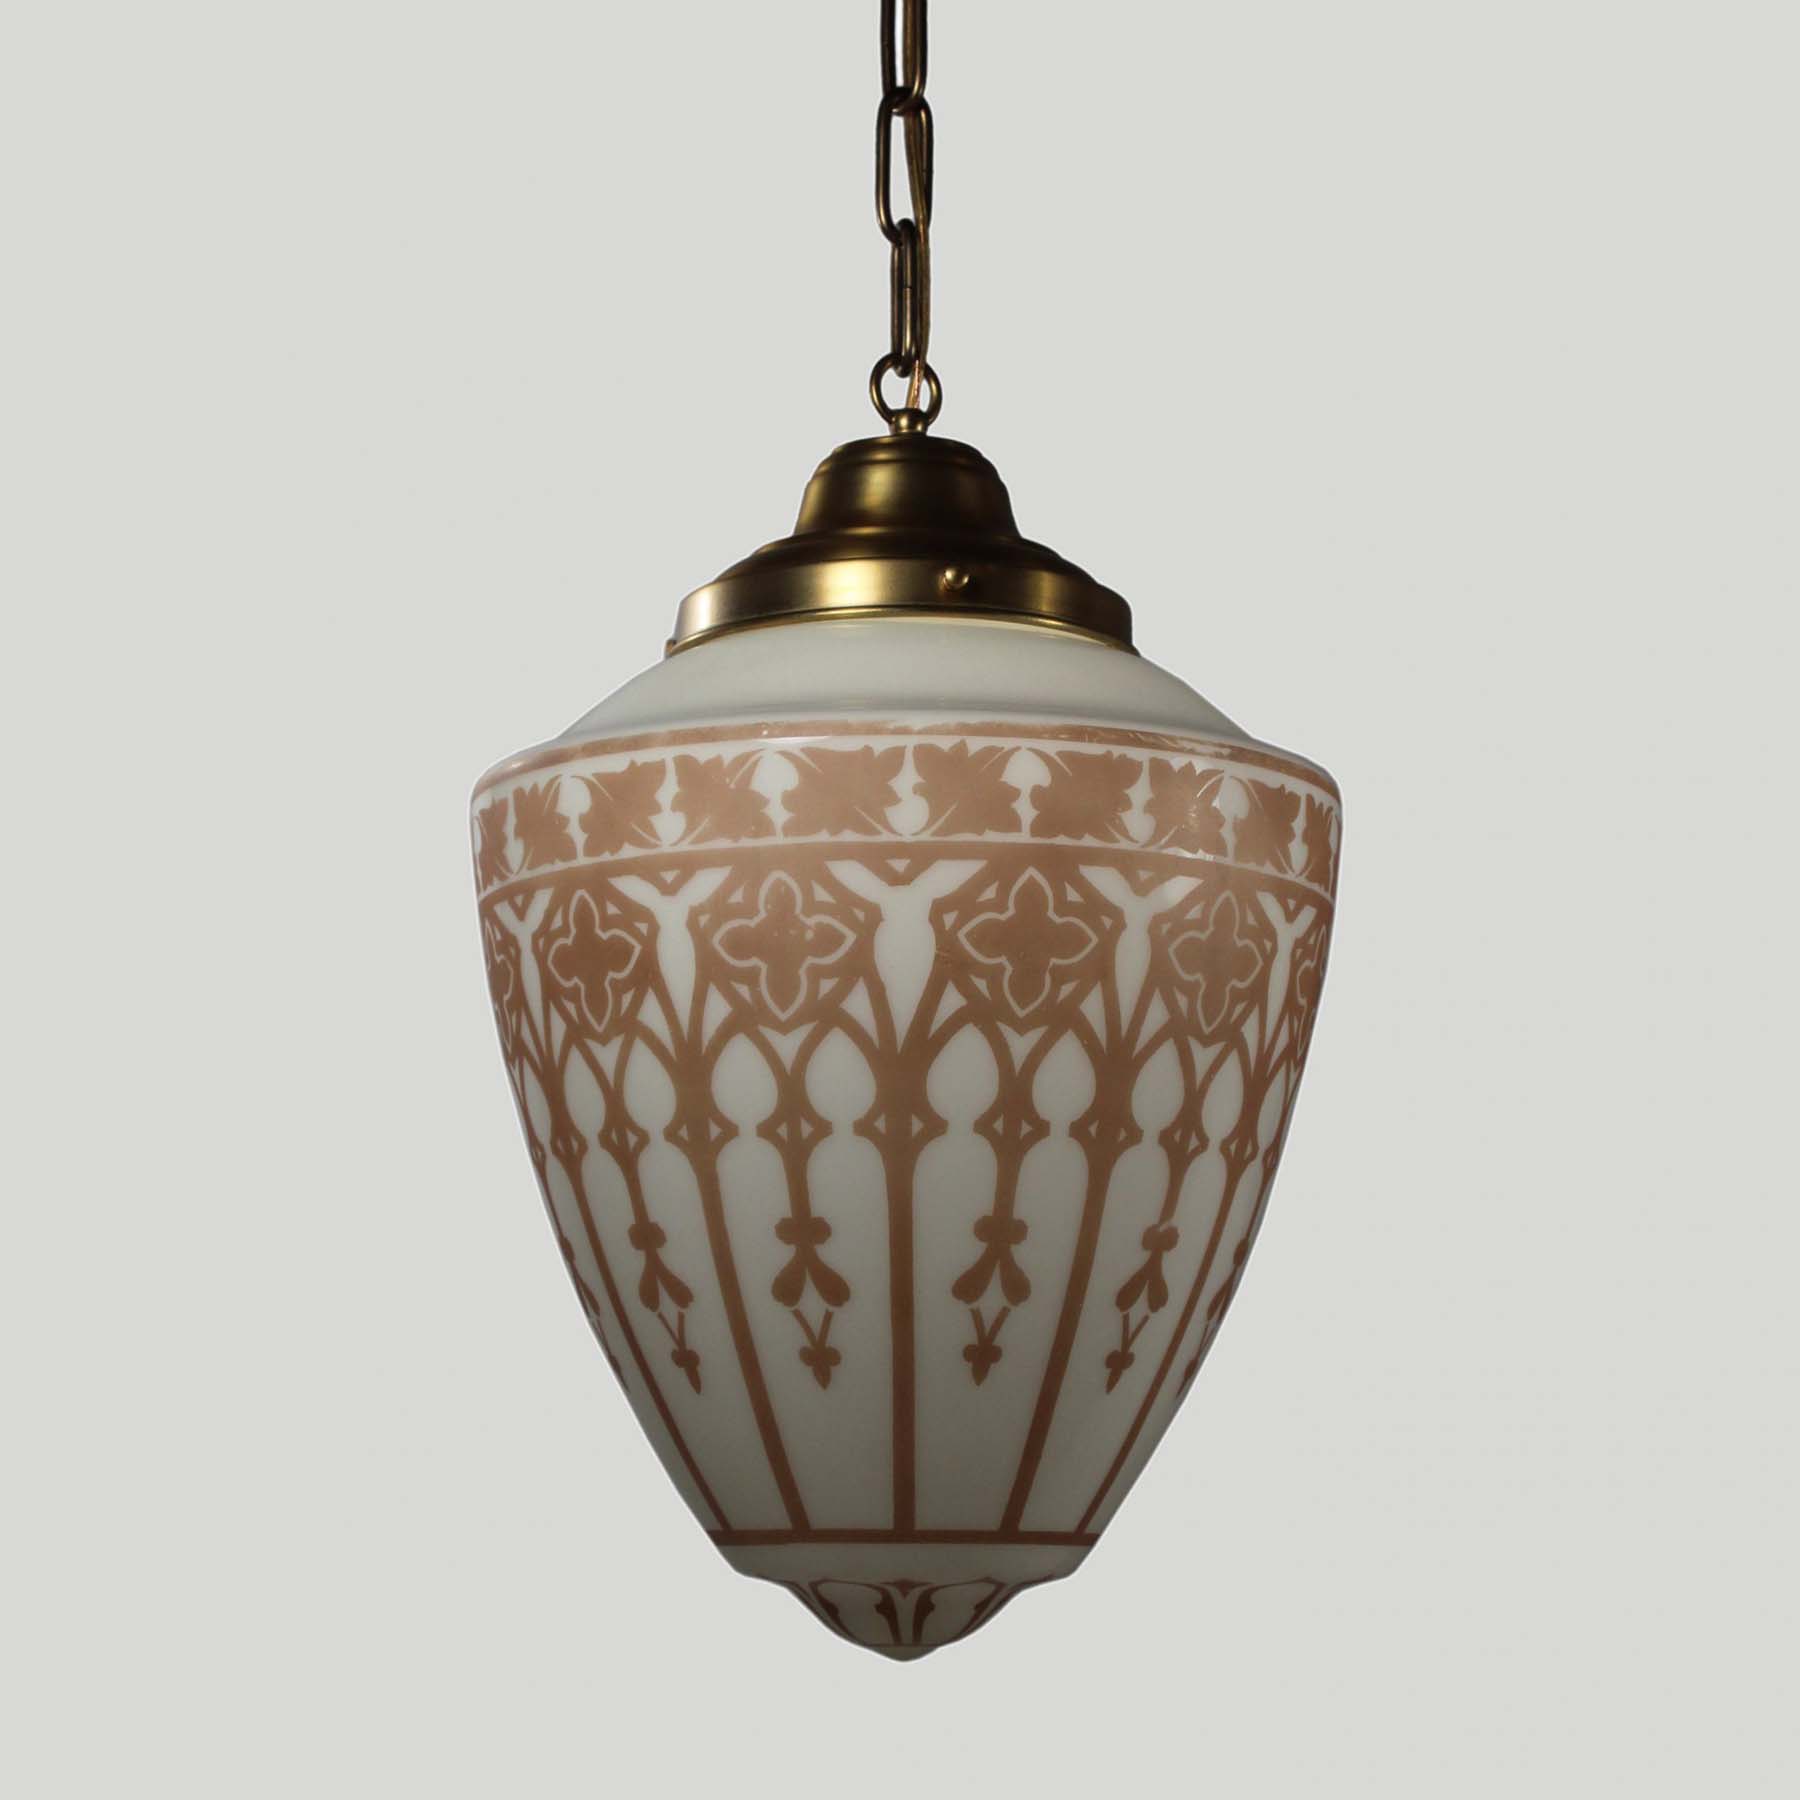 Matching Antique Pendant Lights with Original Glass Shades-71819